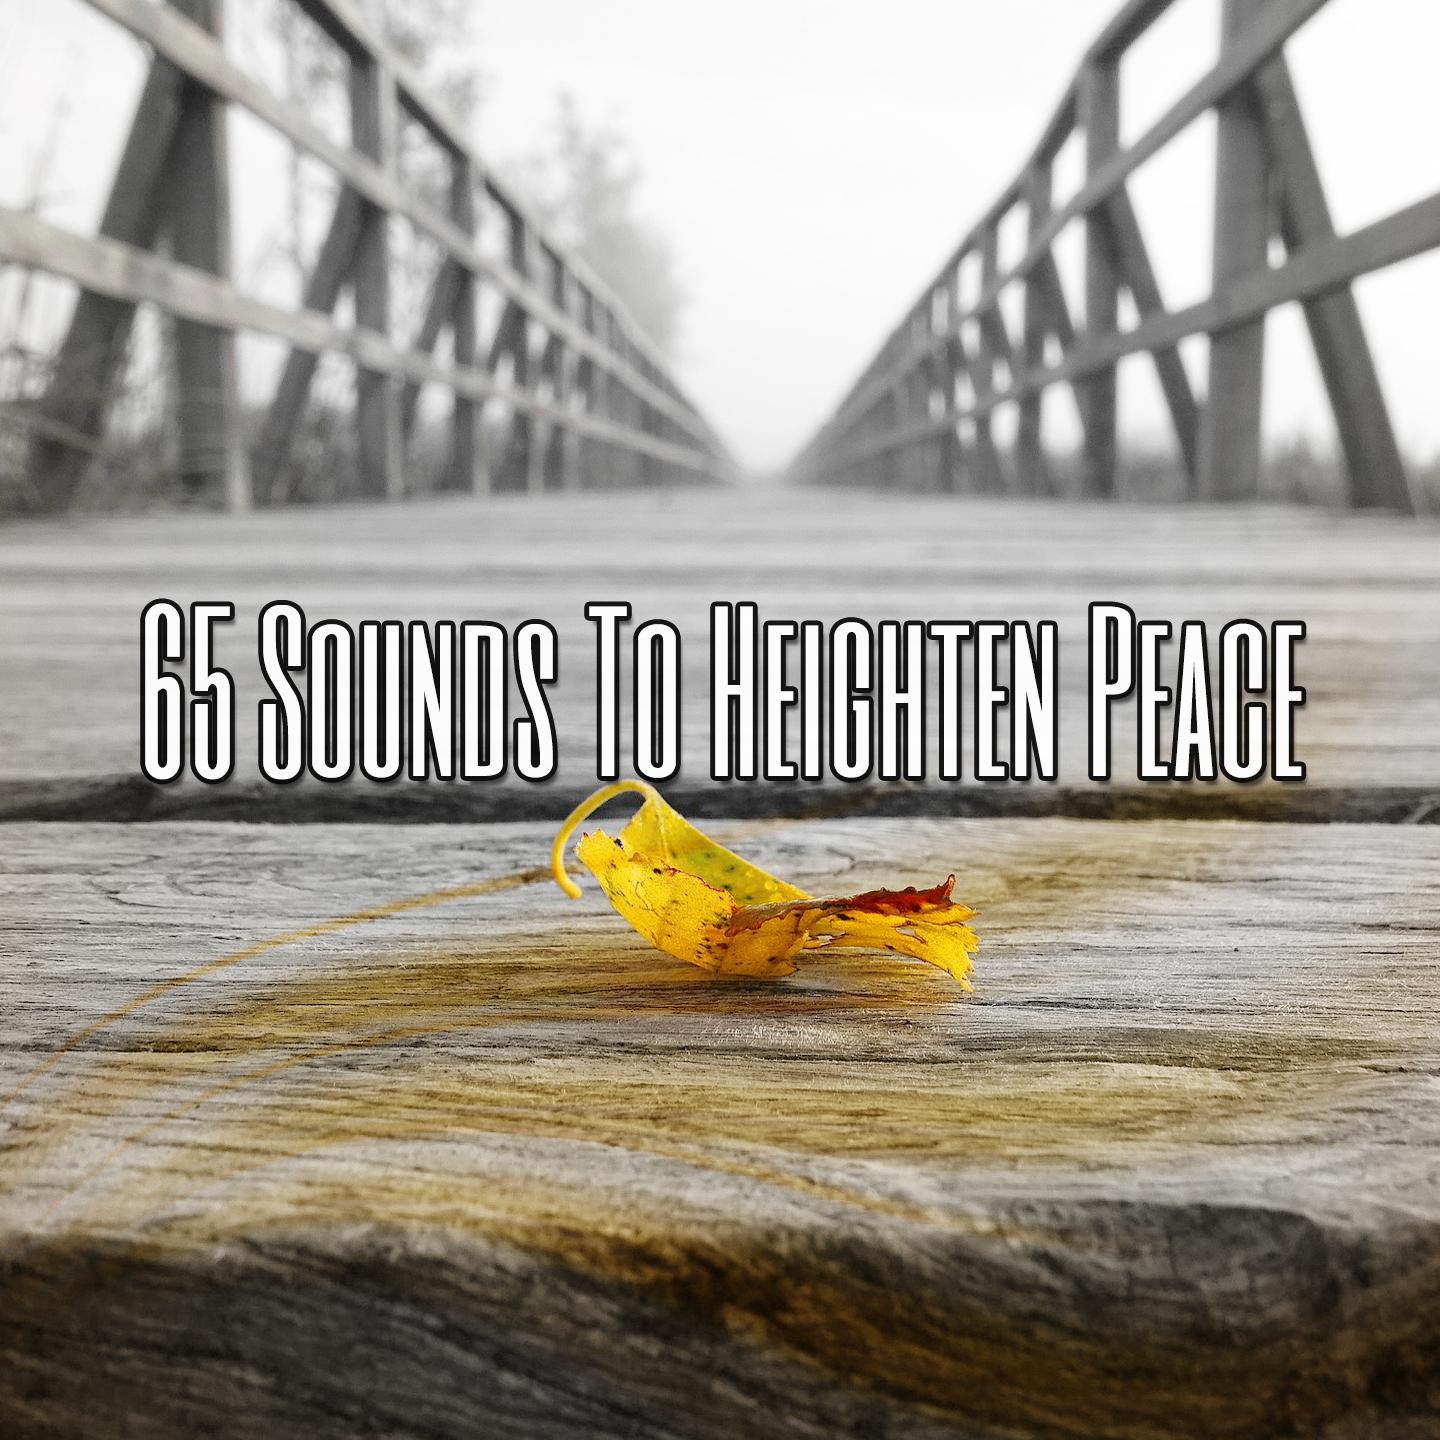 65 Sounds to Heighten Peace